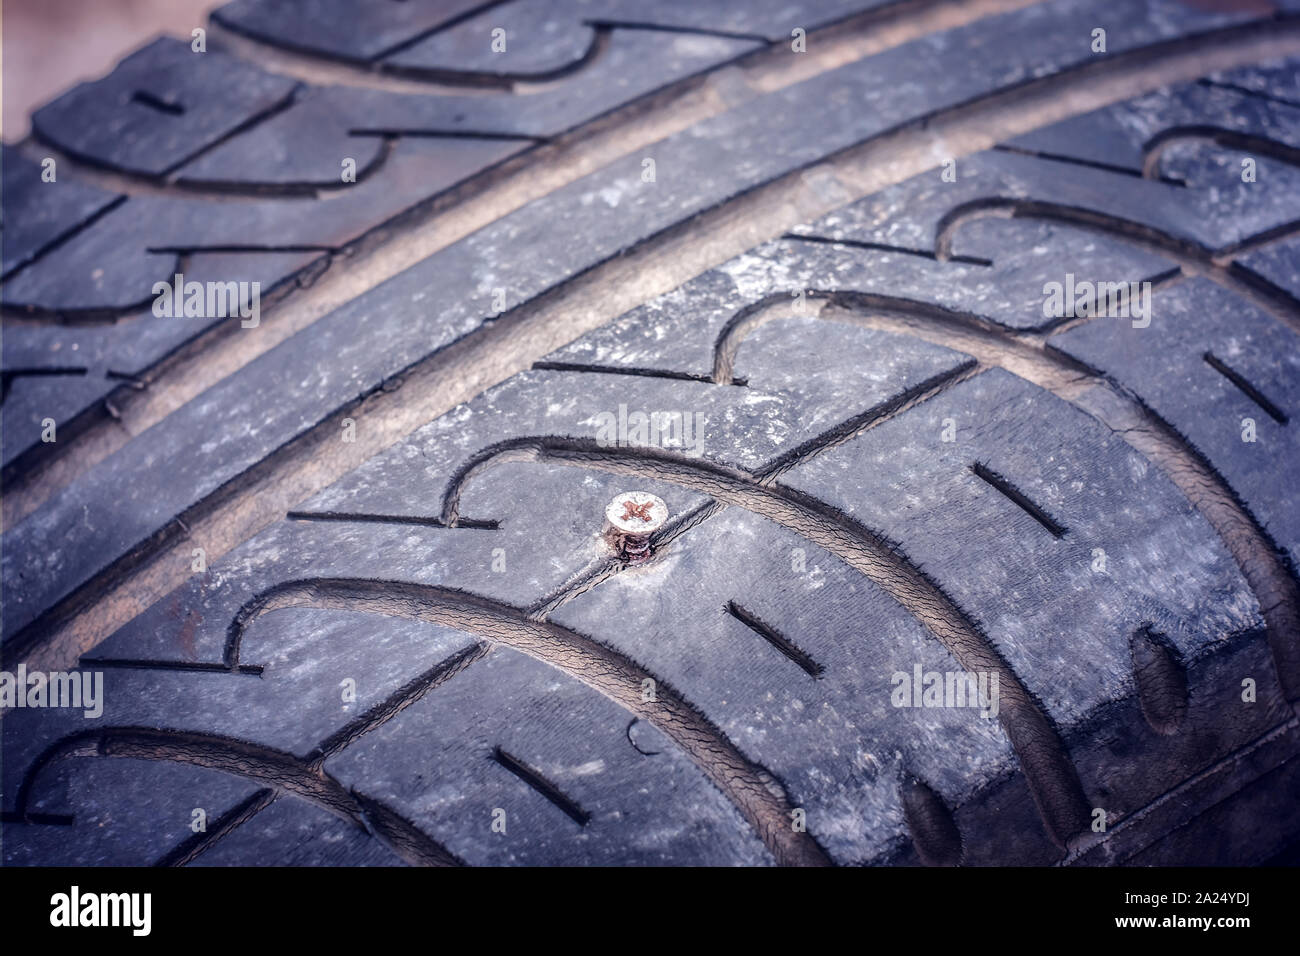 Closeup of flat car tire punctured with a screw Stock Photo